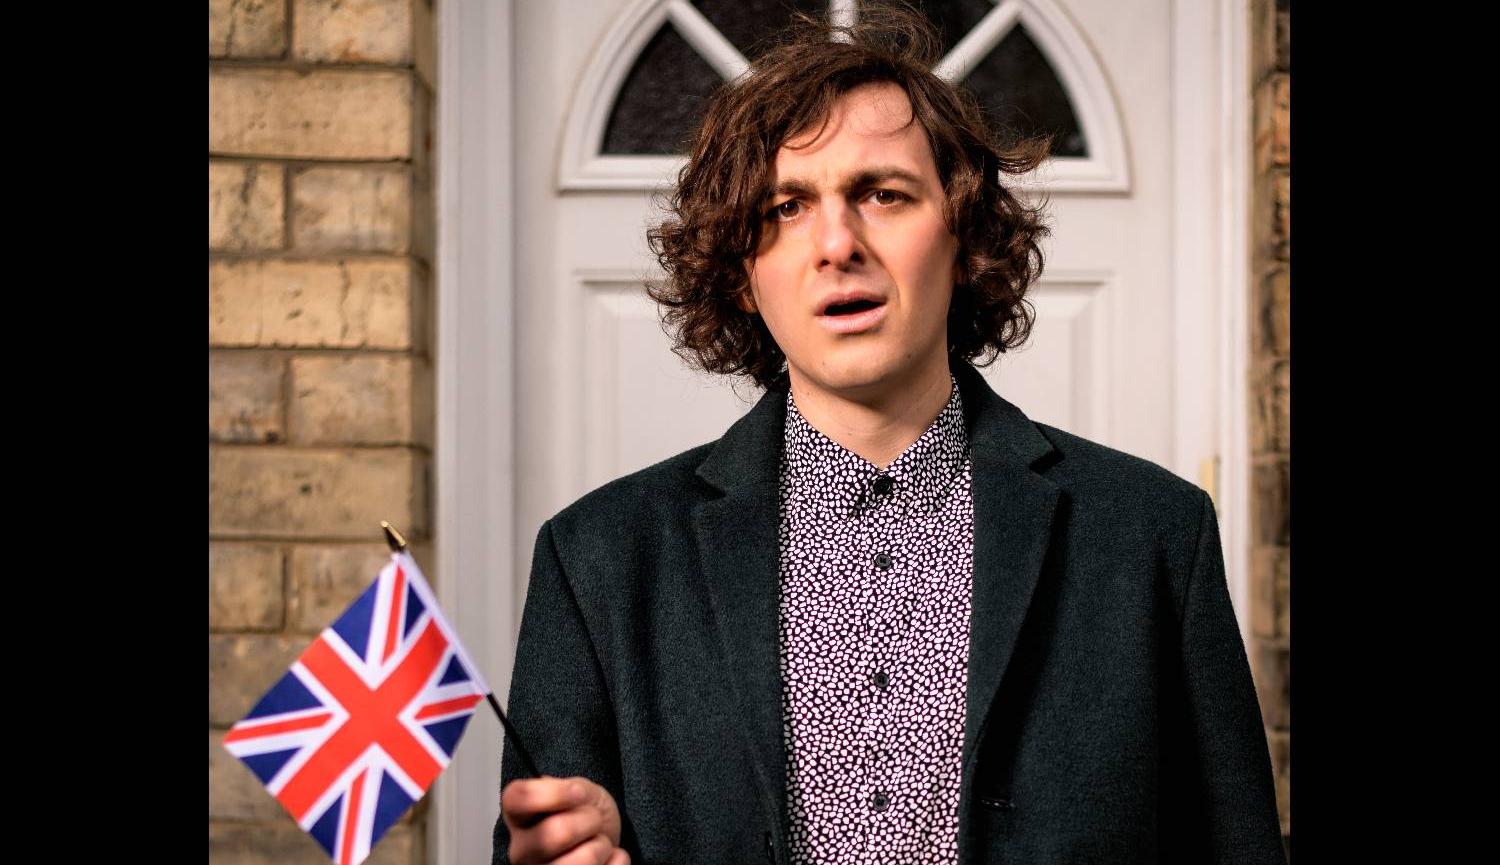 Rowan McCabe Poet standing in front of a door holding a Union Jack 